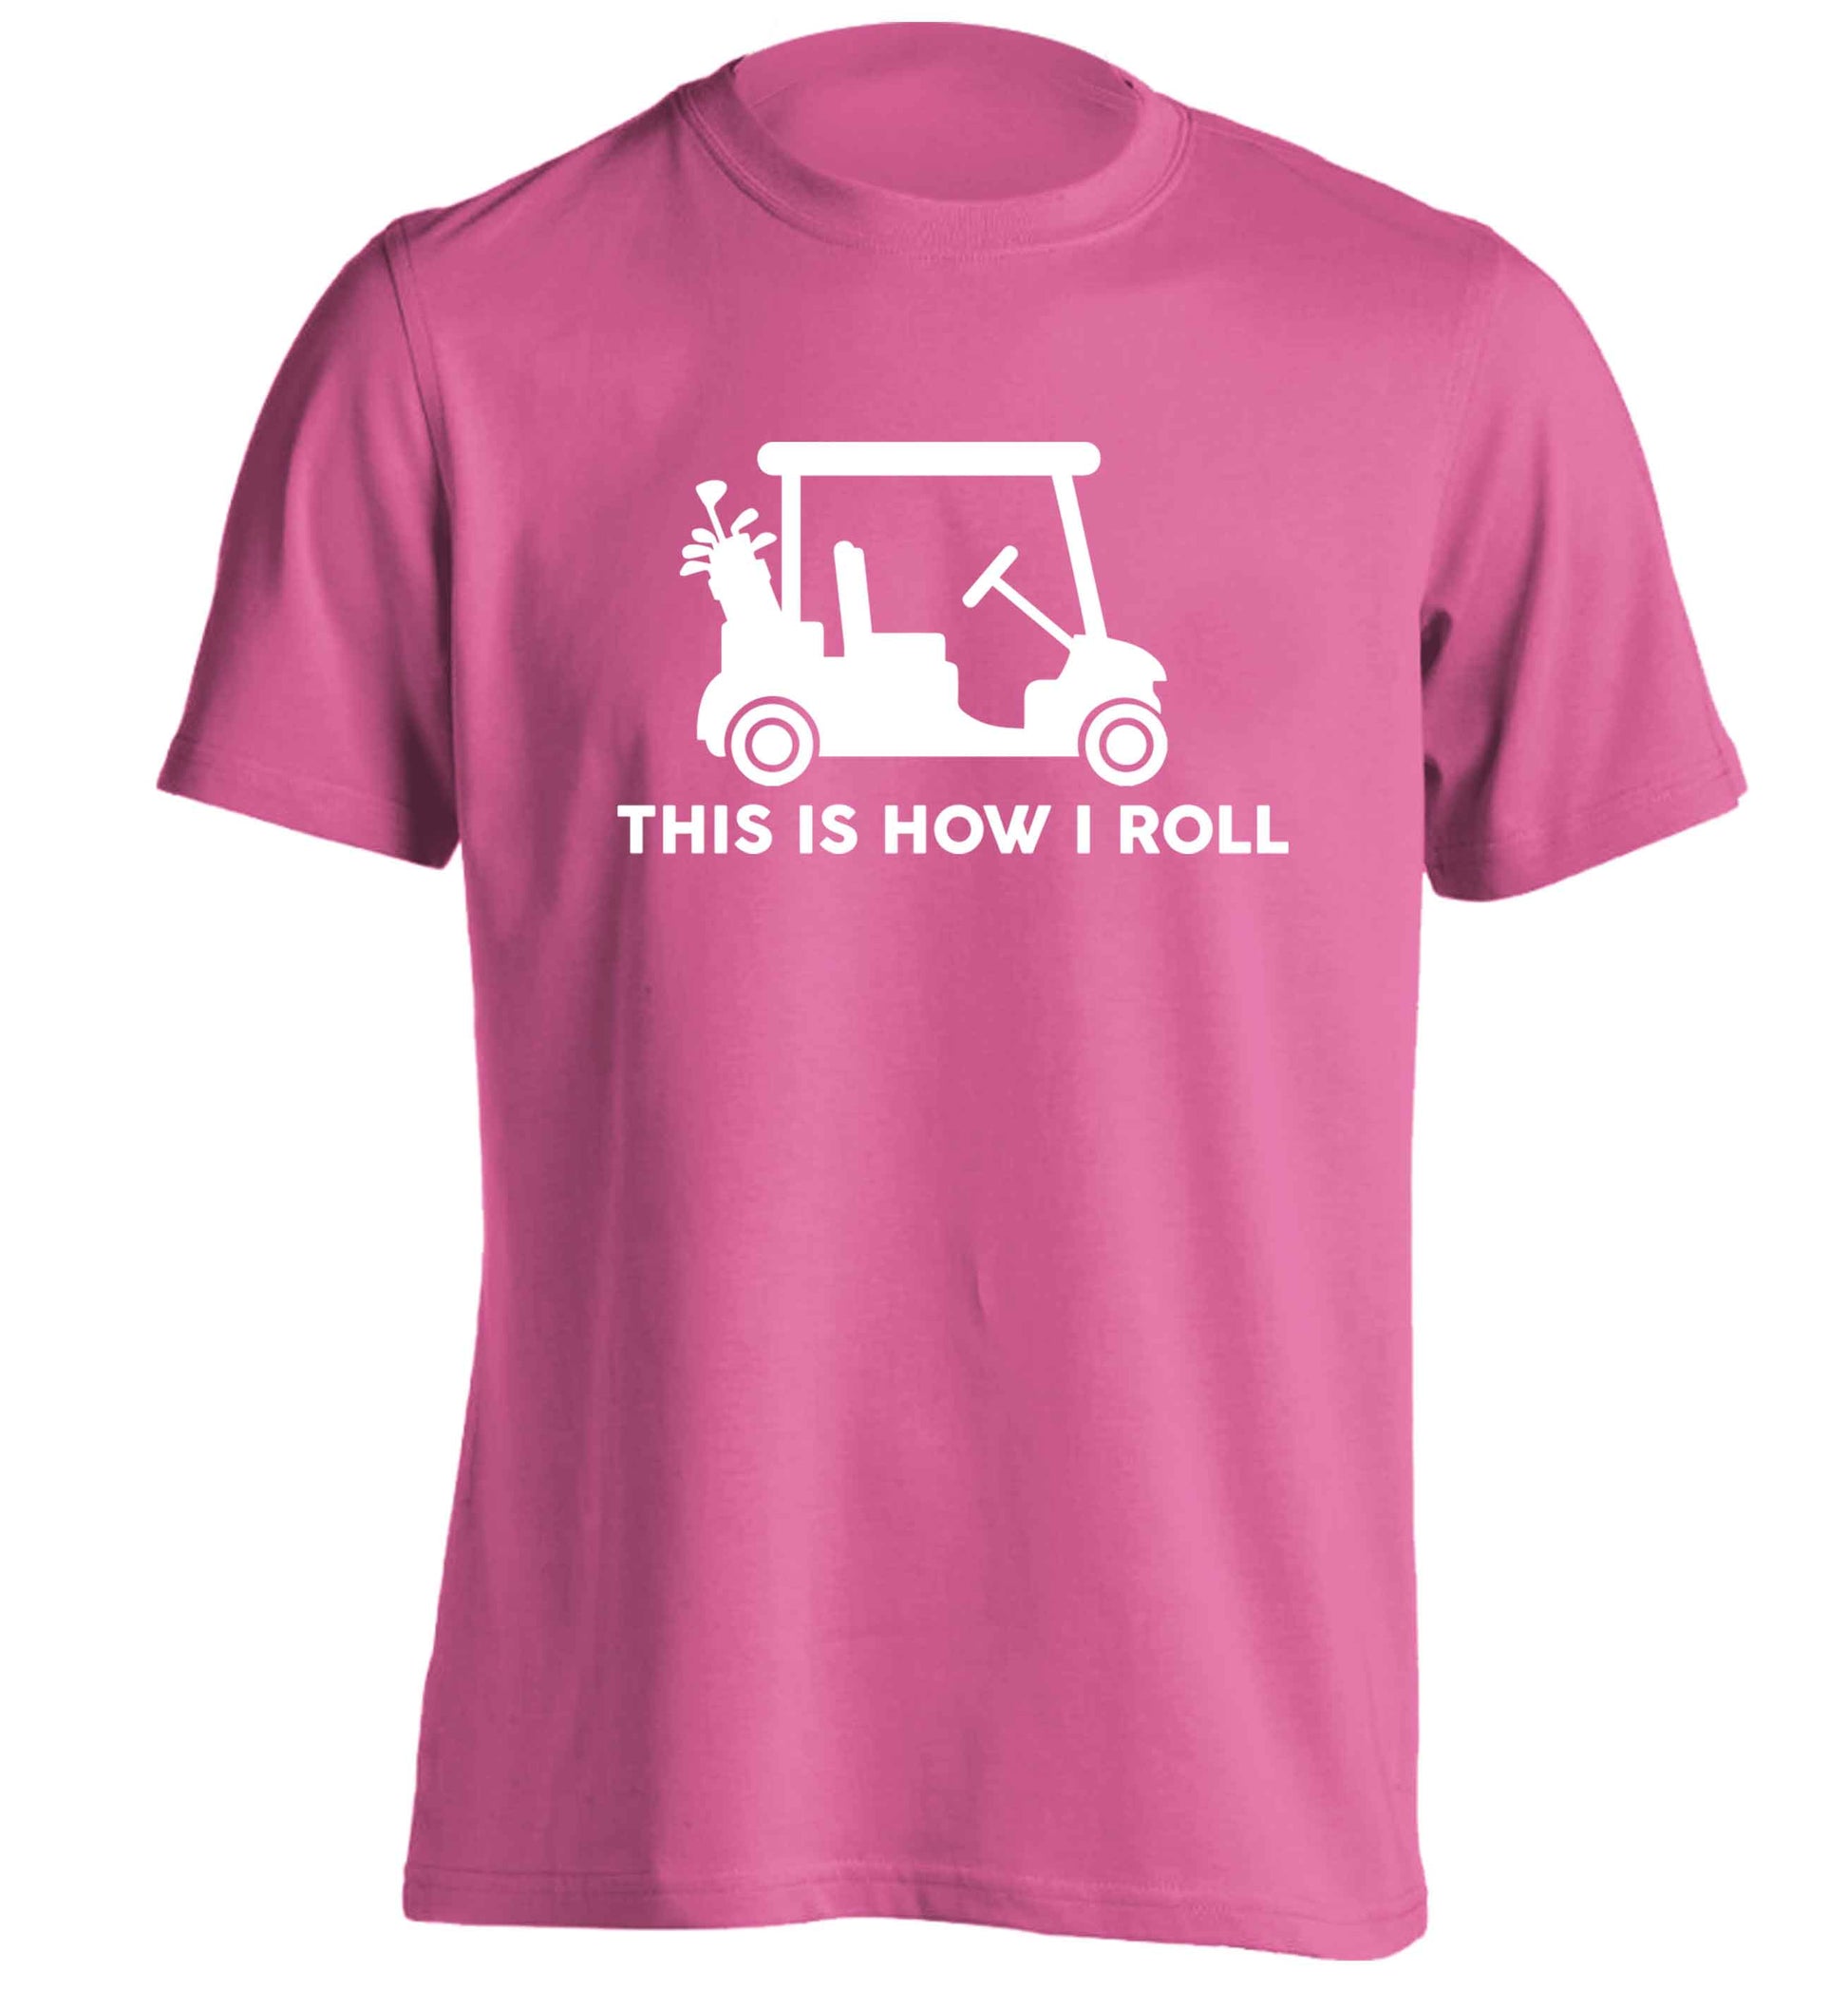 This is how I roll golf cart adults unisex pink Tshirt 2XL